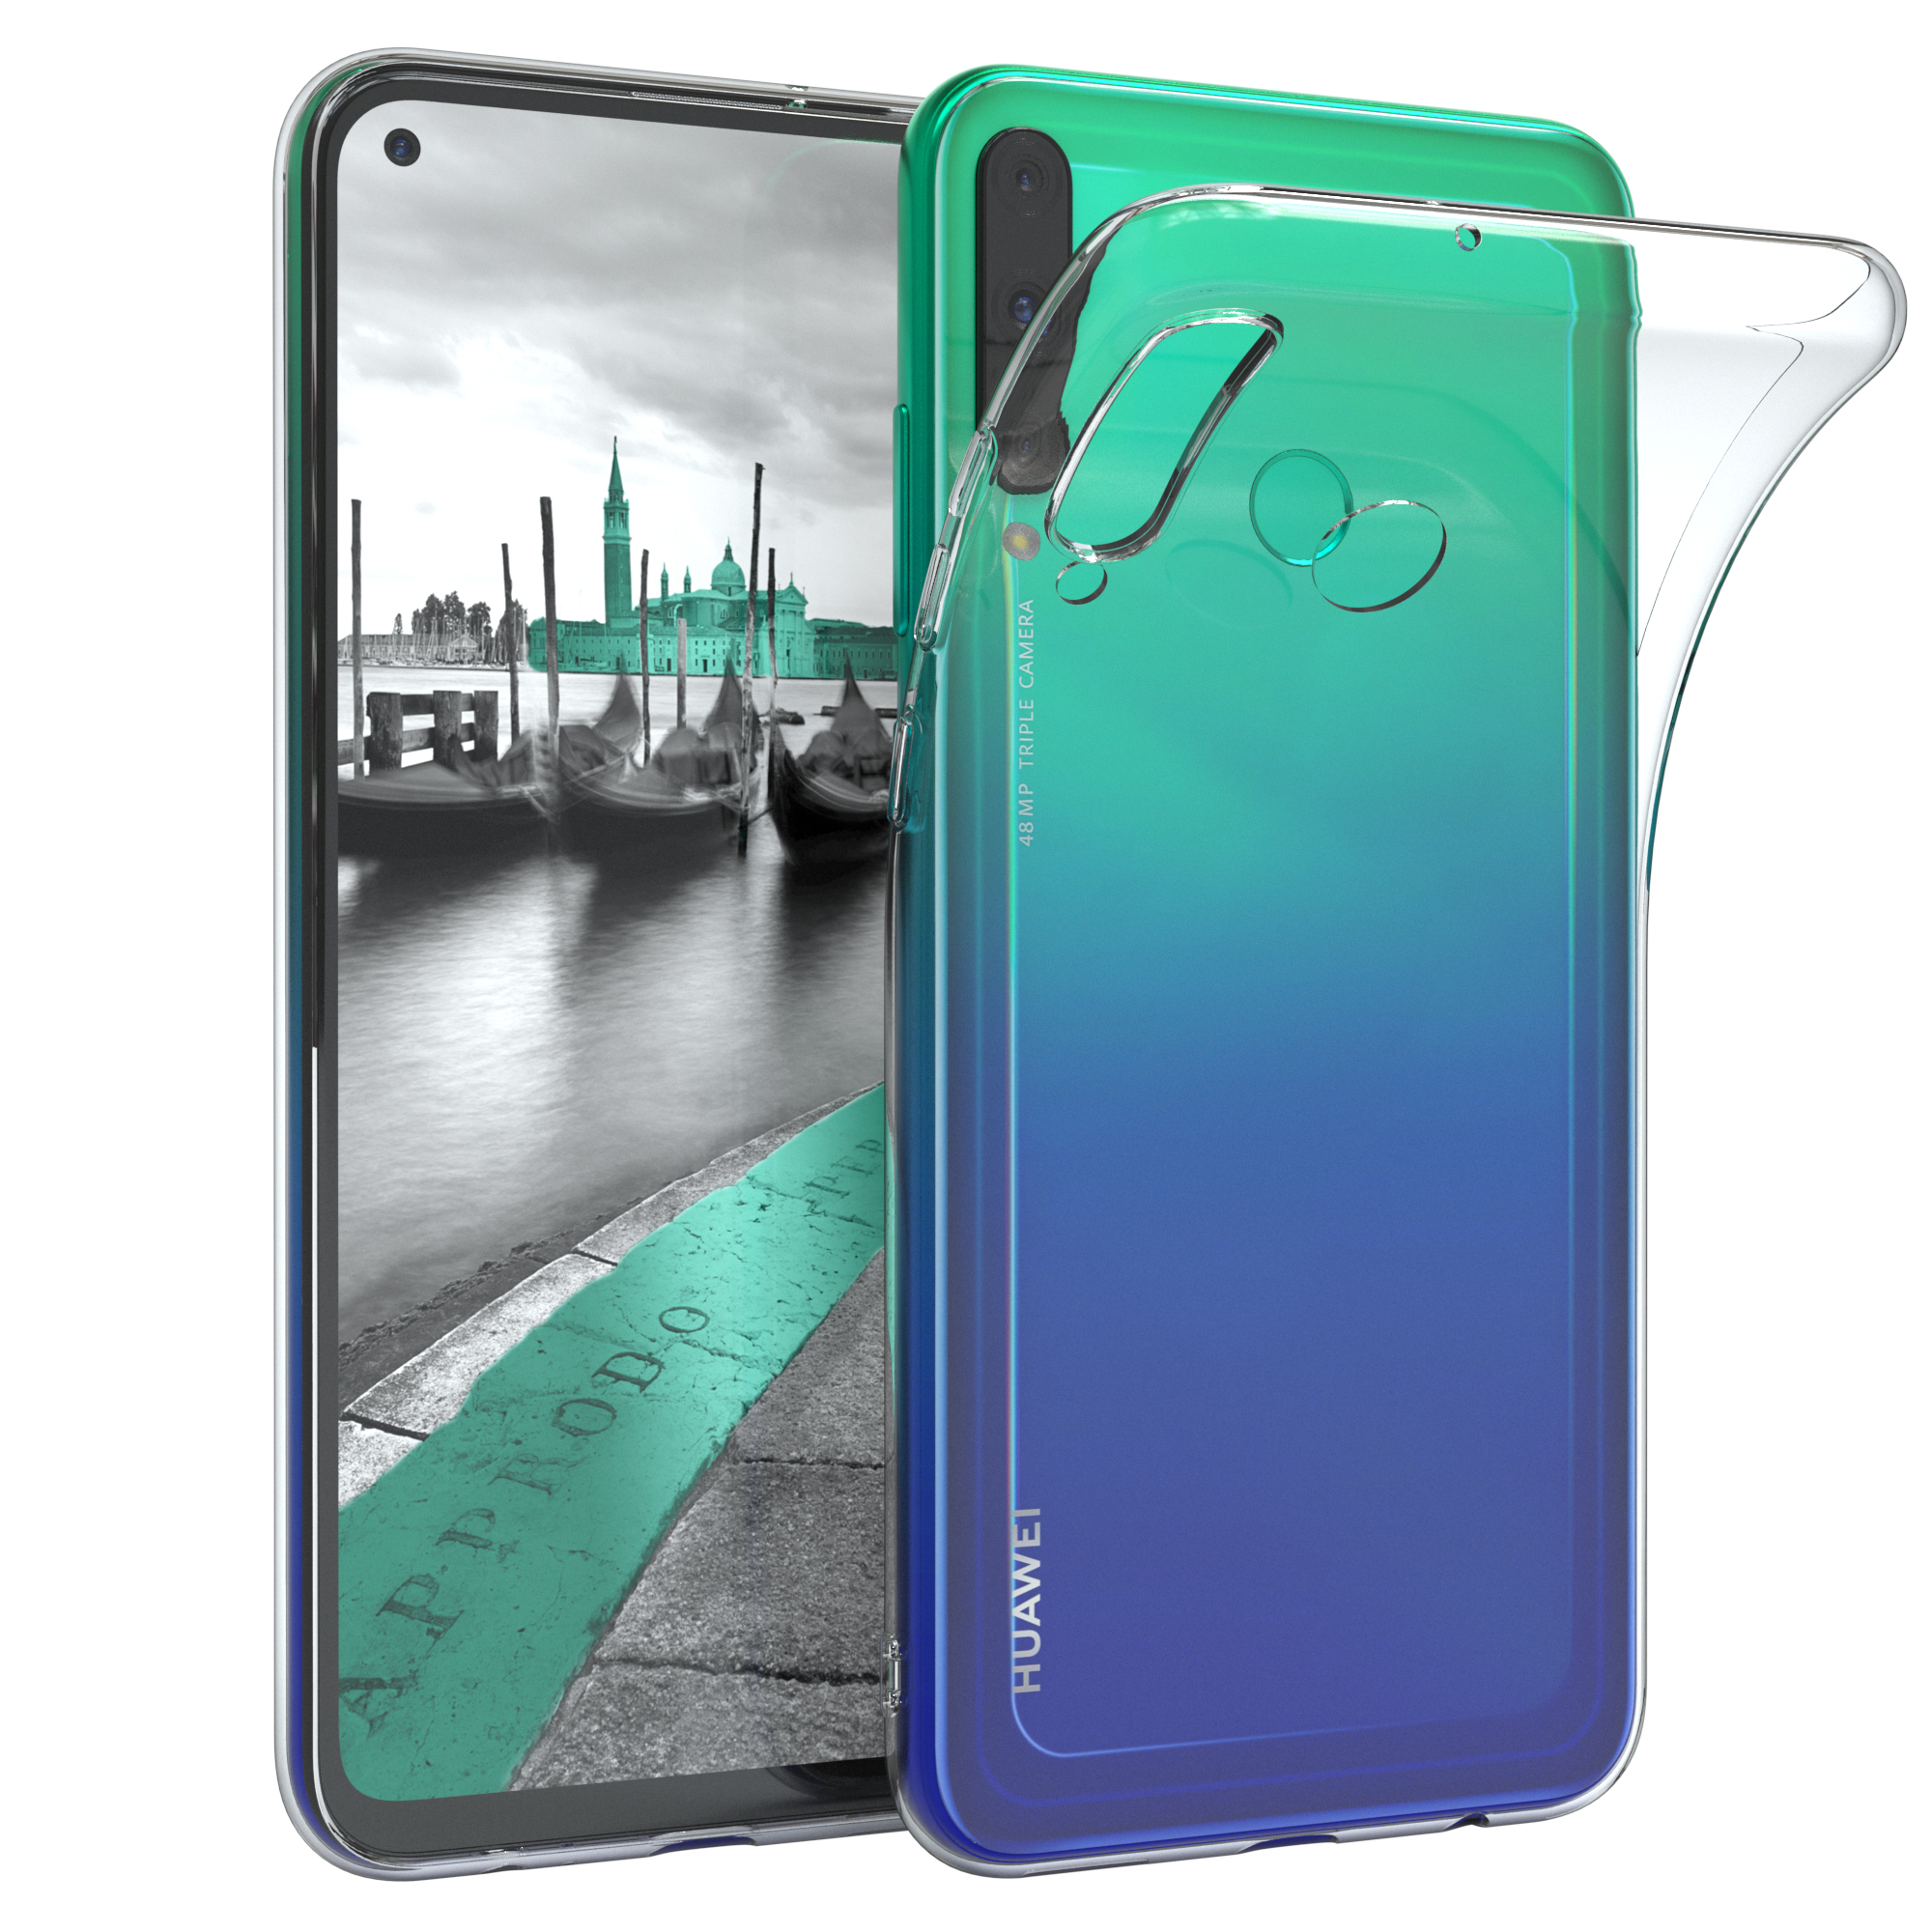 E, EAZY CASE Durchsichtig Huawei, Backcover, Clear, P40 Slimcover Lite